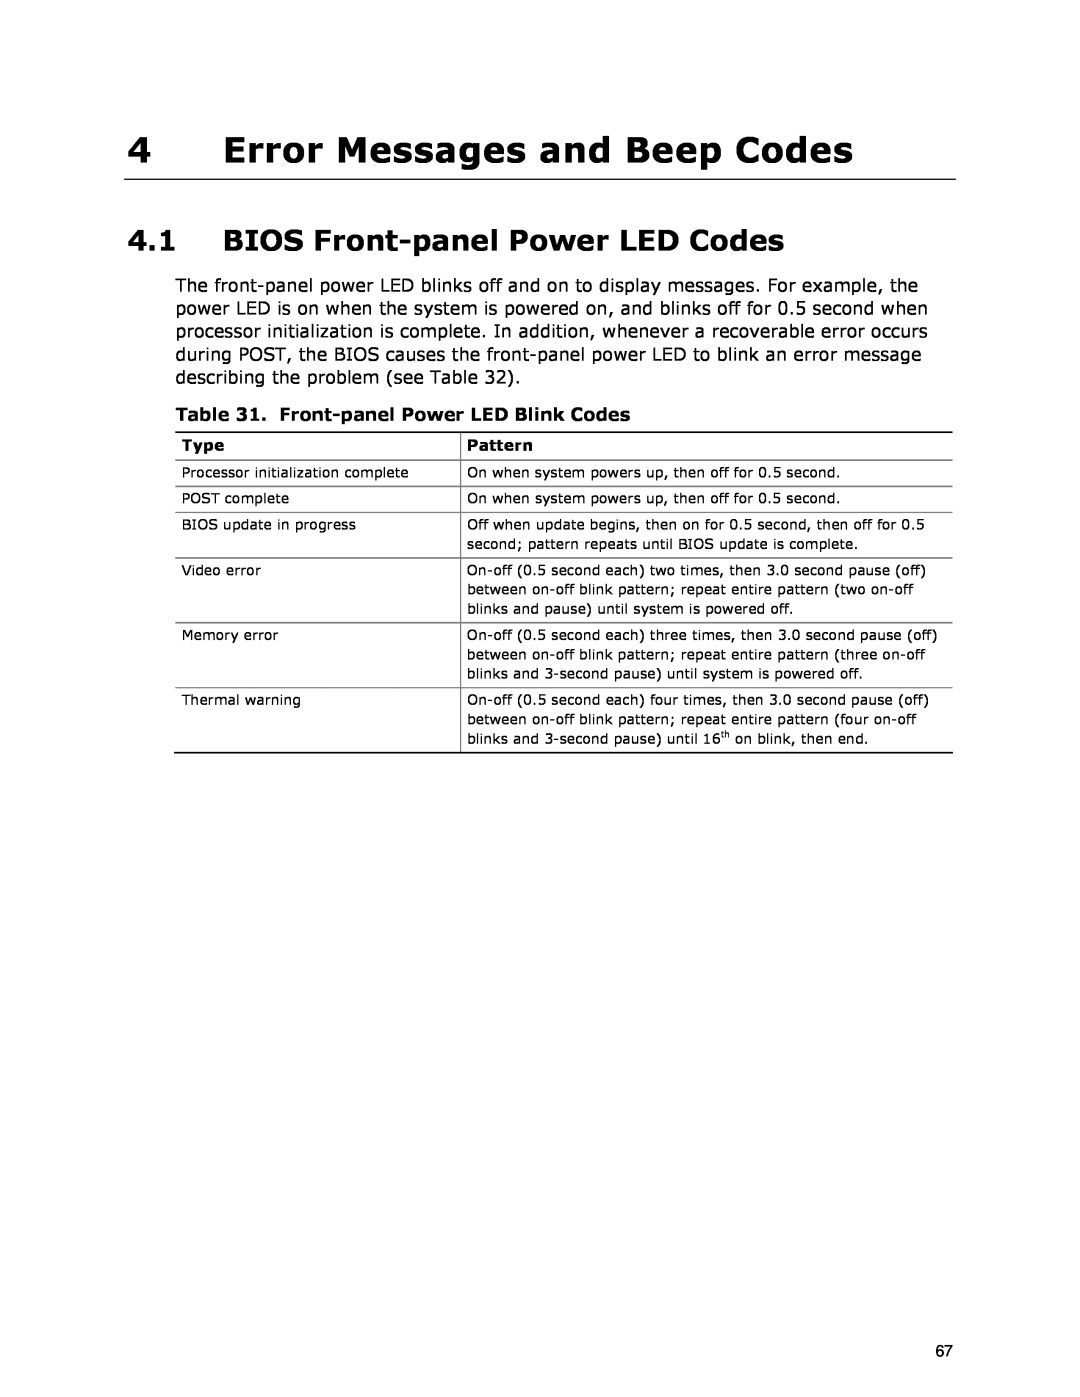 Intel D945GCLF2 Error Messages and Beep Codes, BIOS Front-panel Power LED Codes, Front-panel Power LED Blink Codes, Type 